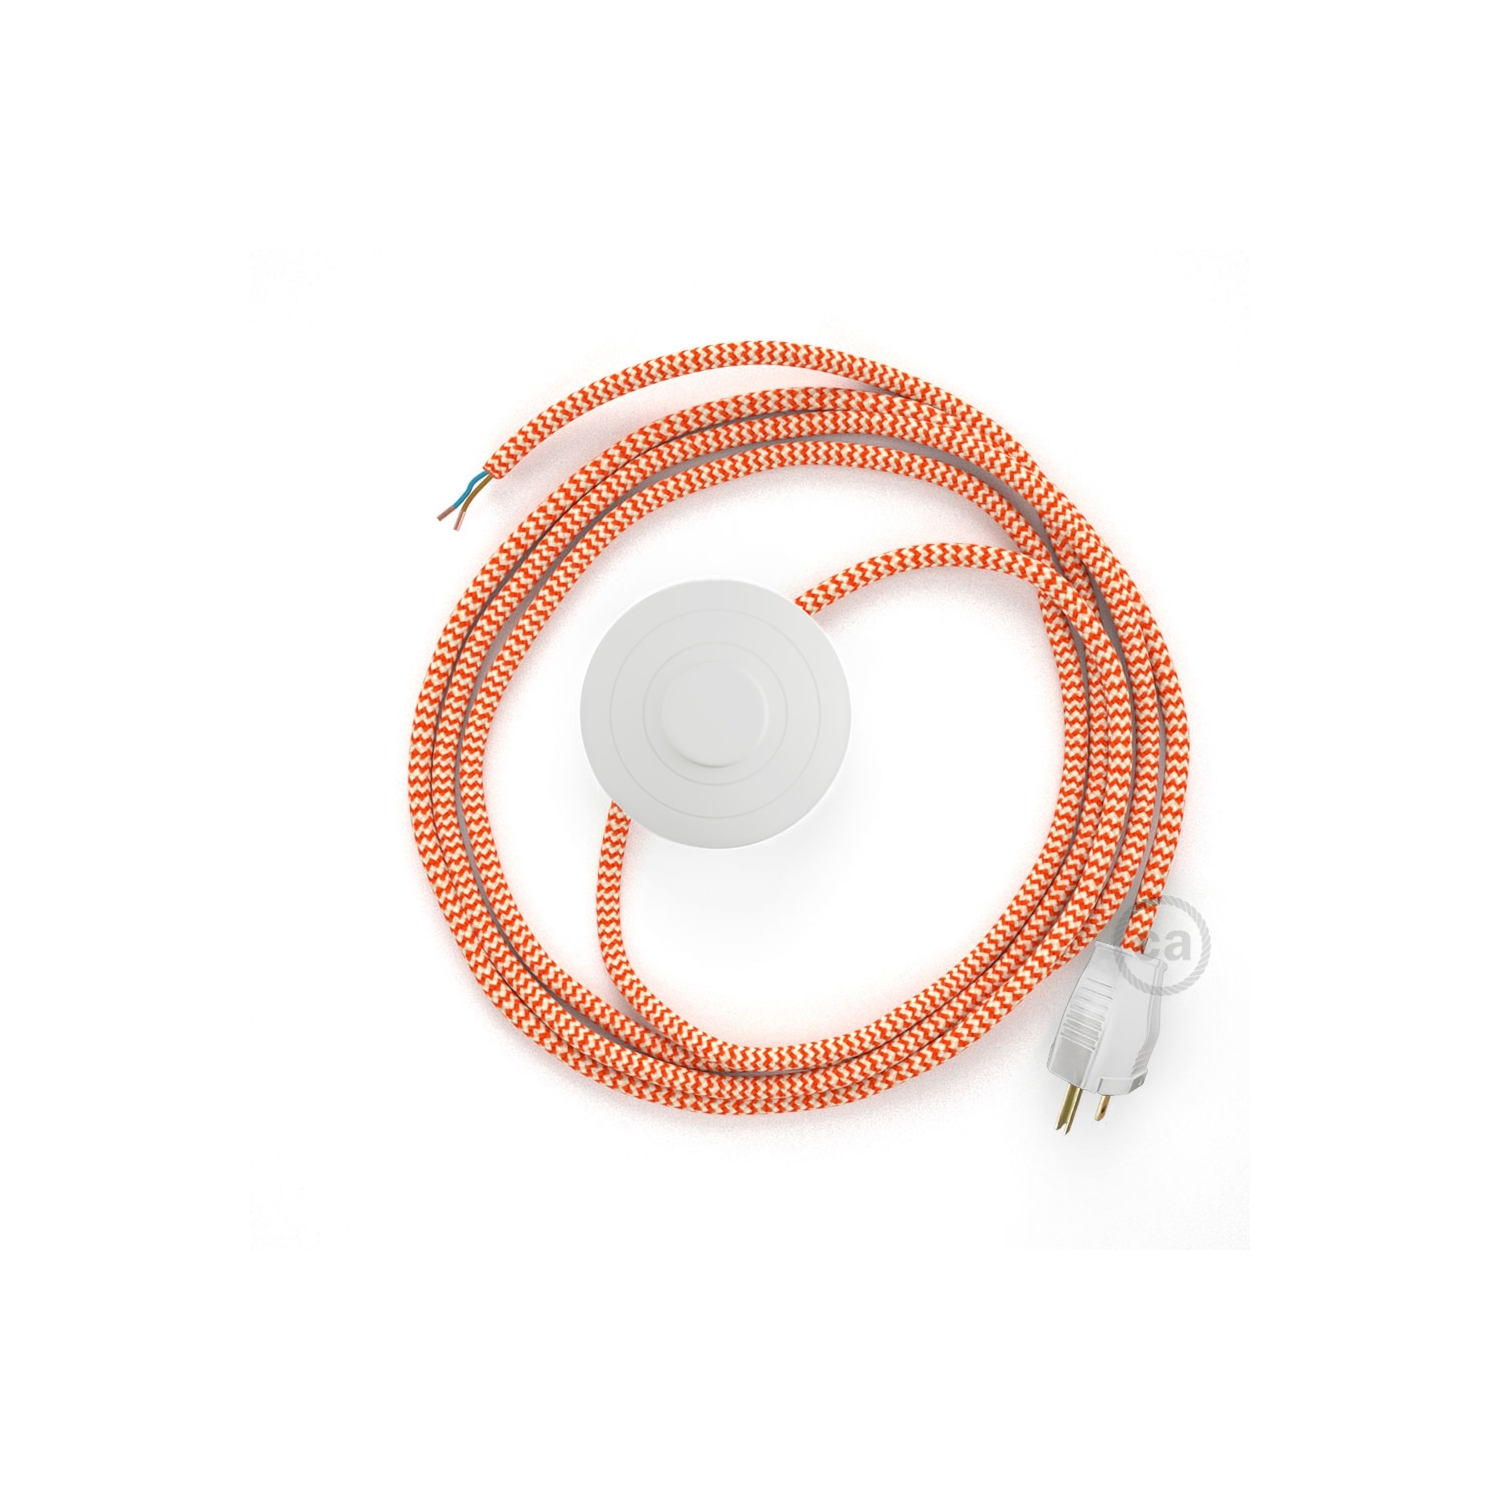 Power Cord with foot switch, RZ15 Orange & White Chevron - Choose color of switch/plug